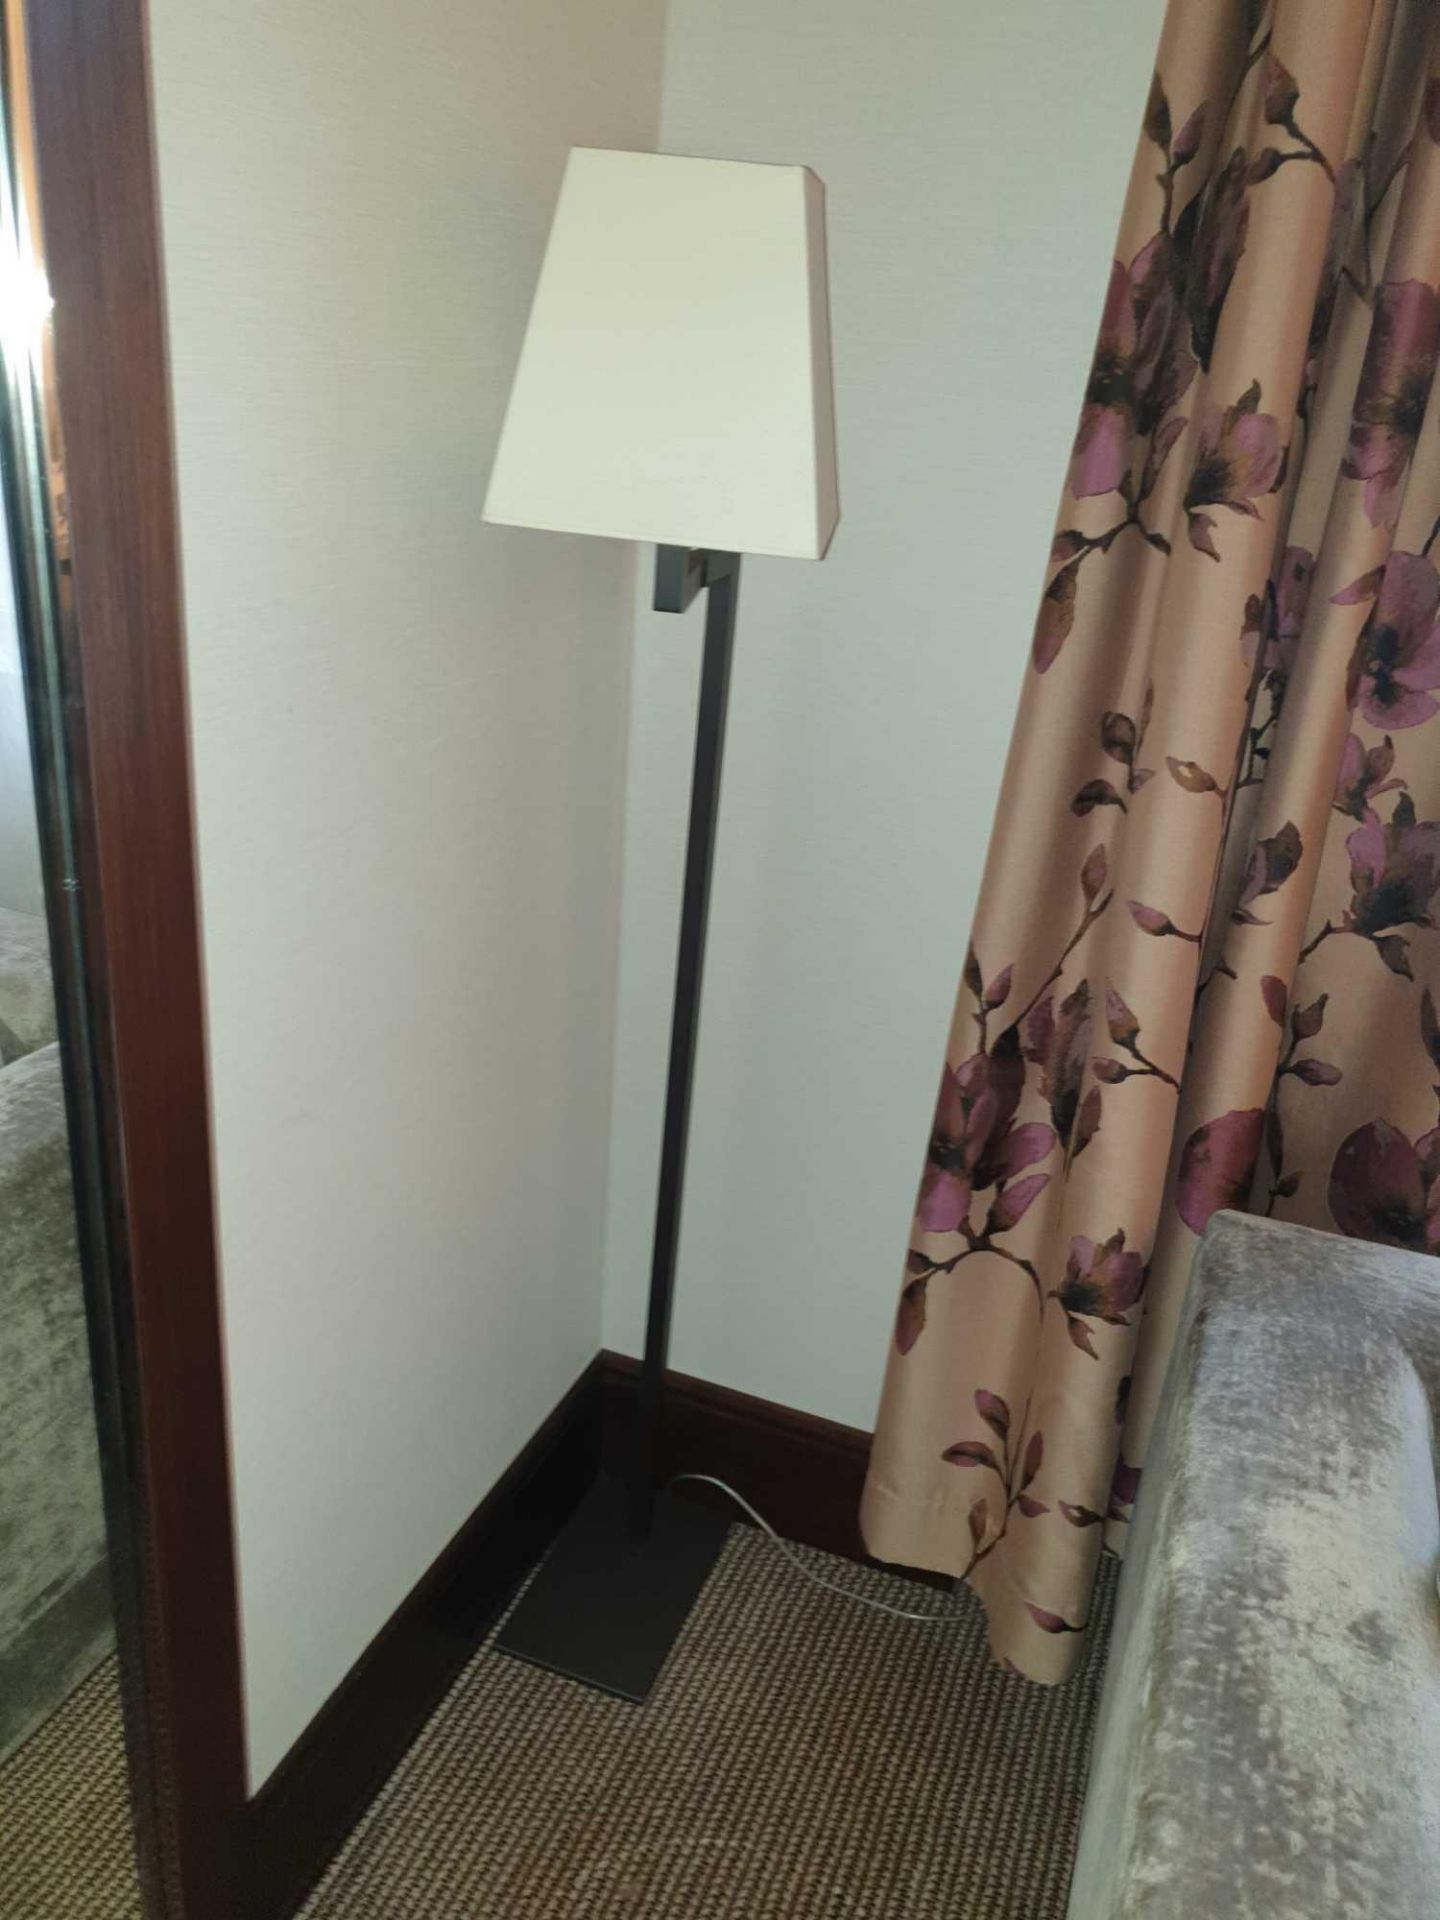 A pair of Sifra Floor Lamps Model LMS 600 ENG Metal Base With Single Arm Single Bulb Complete With - Bild 2 aus 2